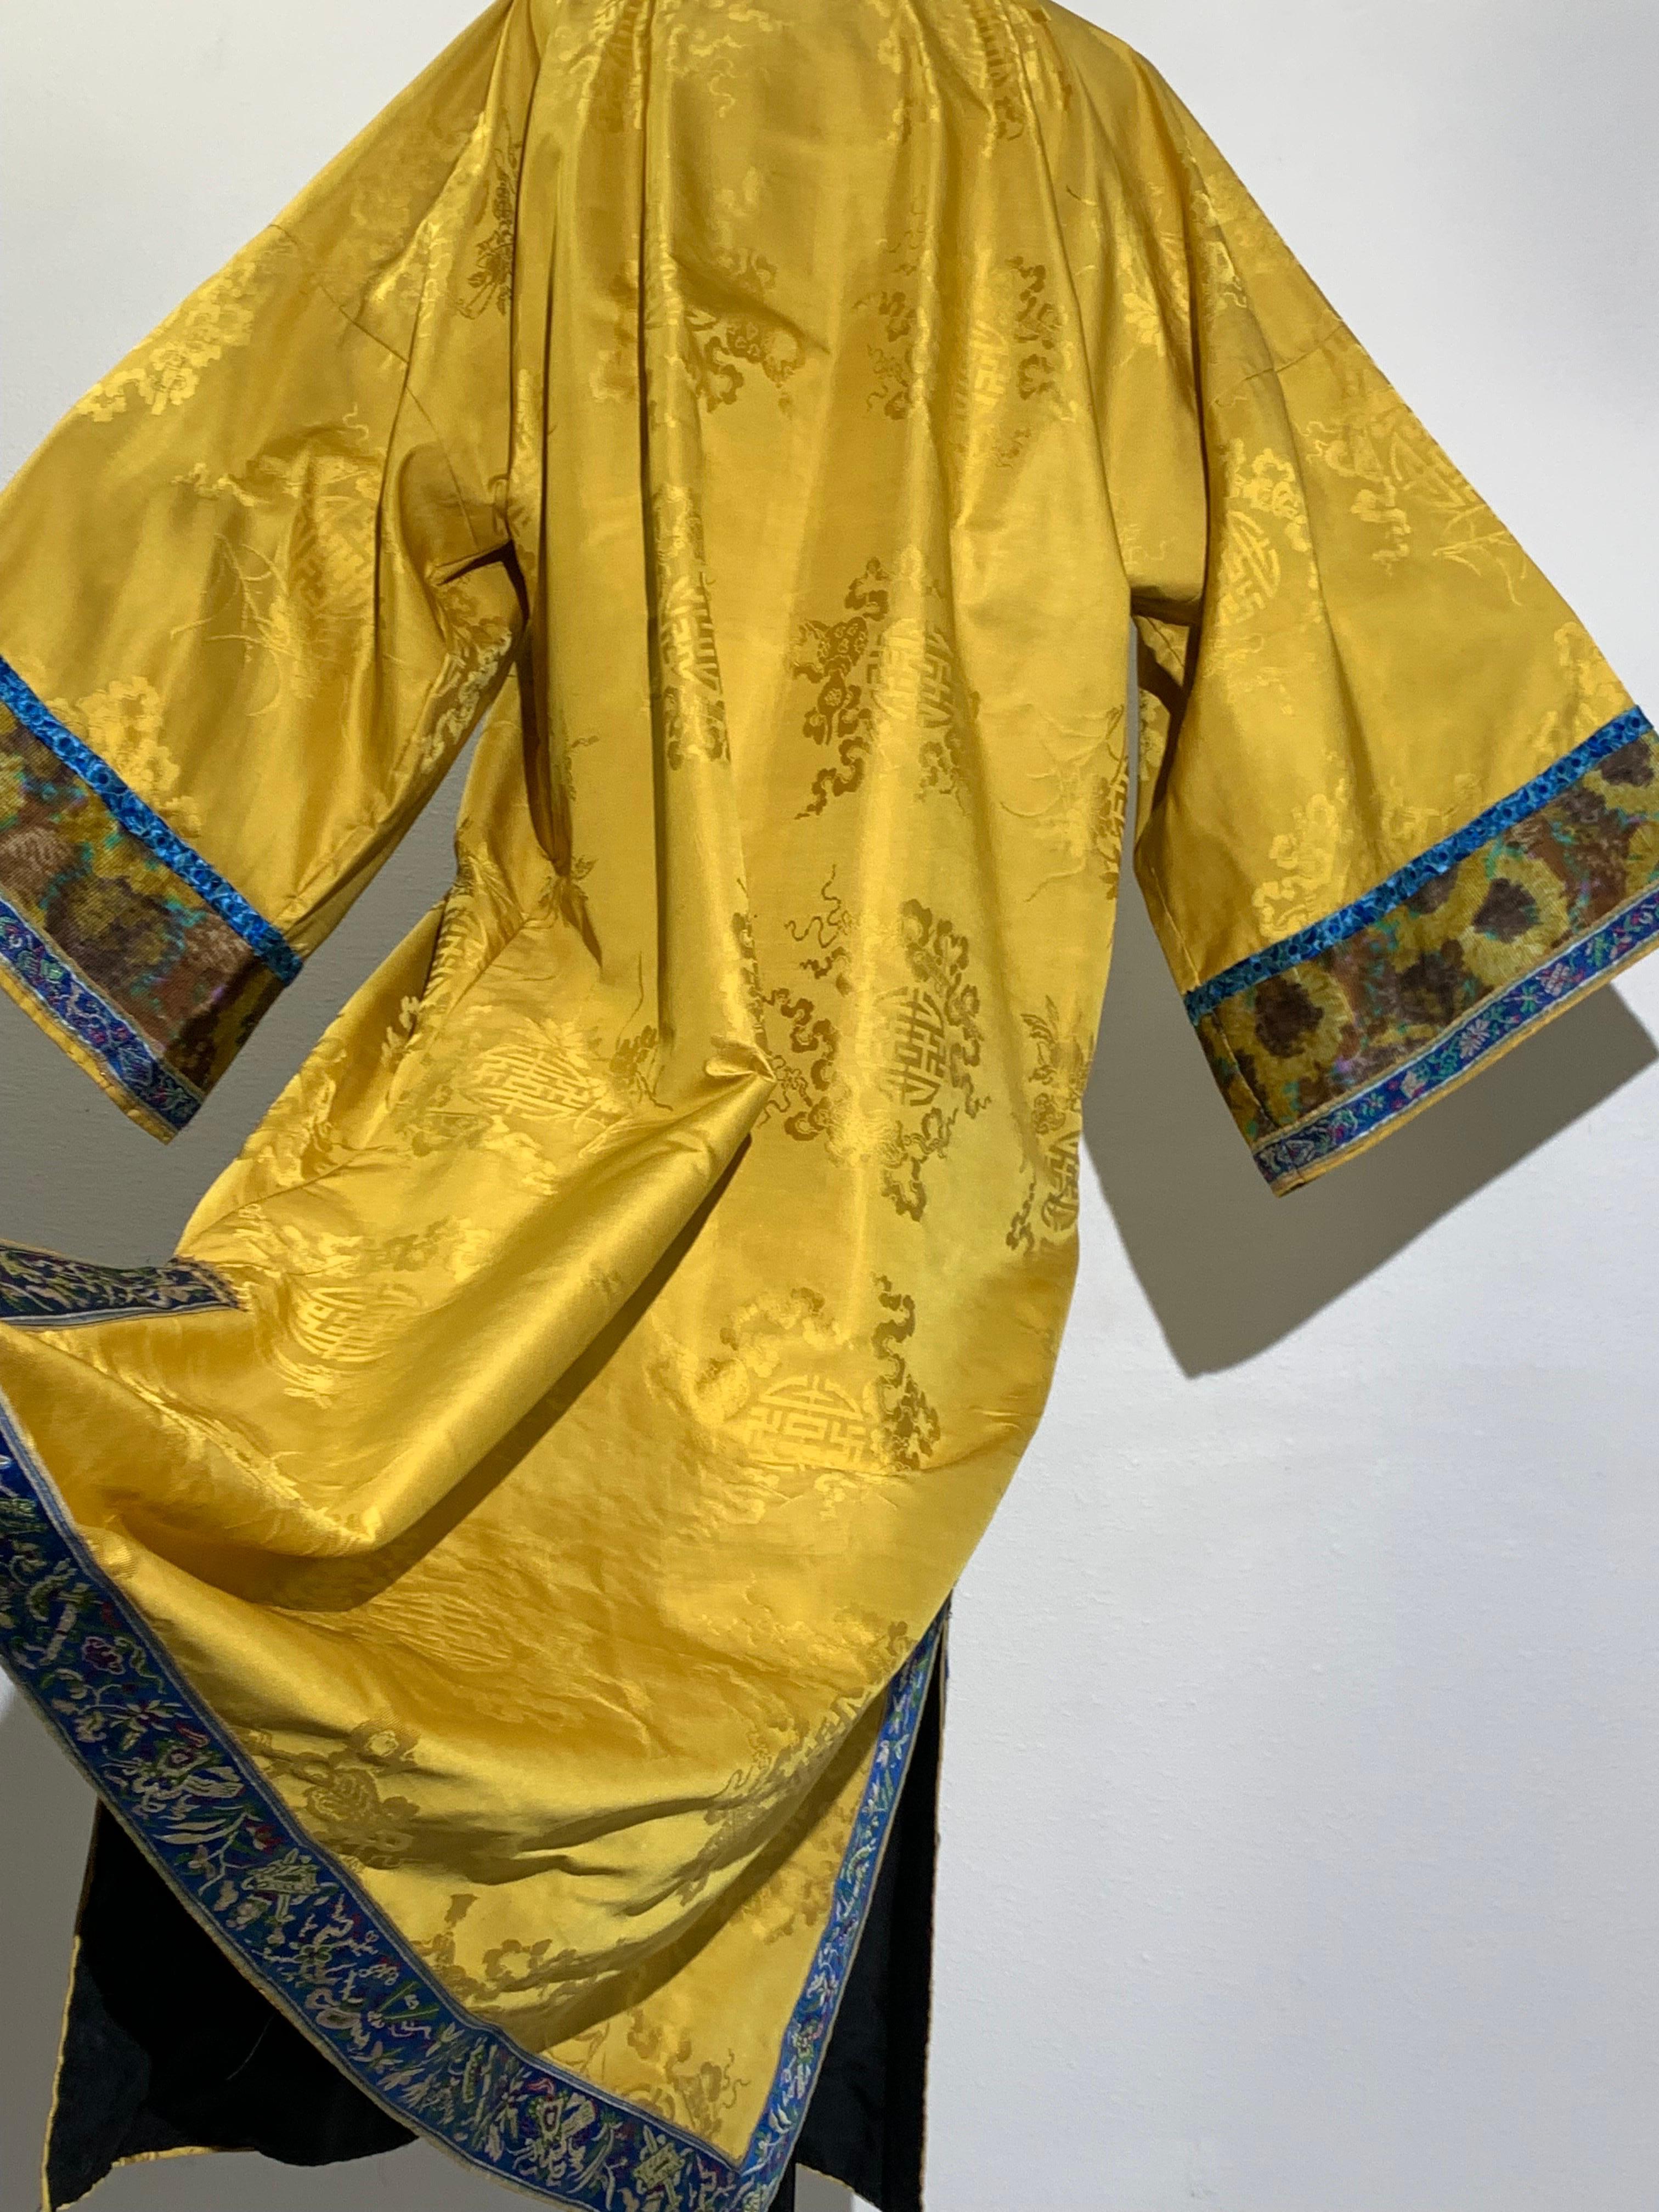 Traditional Imperial Yellow Embroidered Chinese Summer Robe w Blue Banding For Sale 15